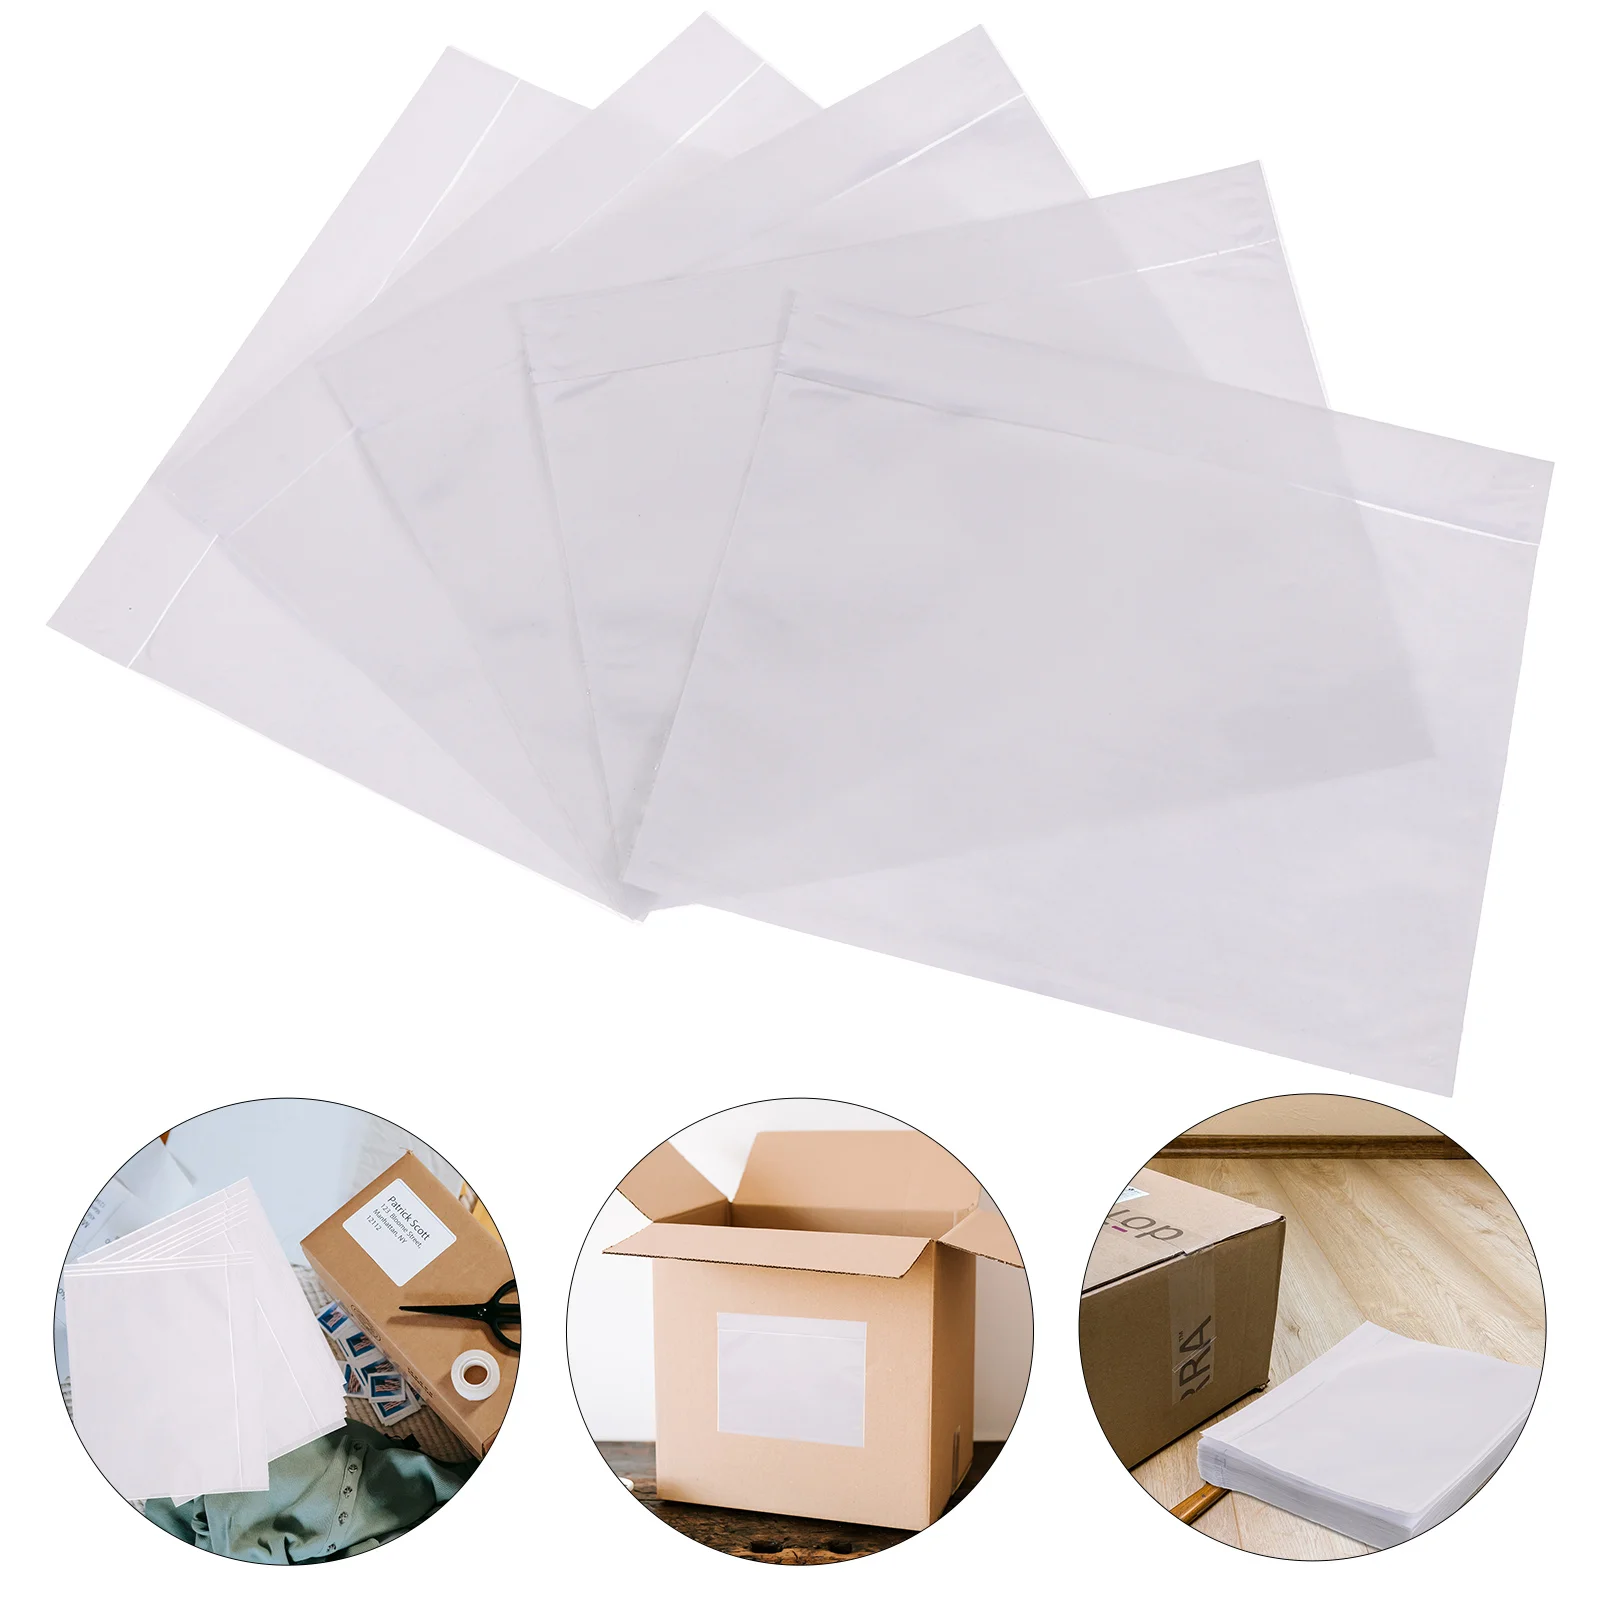 

Self- Adhesive Packing Envelopes Transparent List Bags Envelopes Pouches Bags for Shipping Label Packing Envelope， 100pcs (